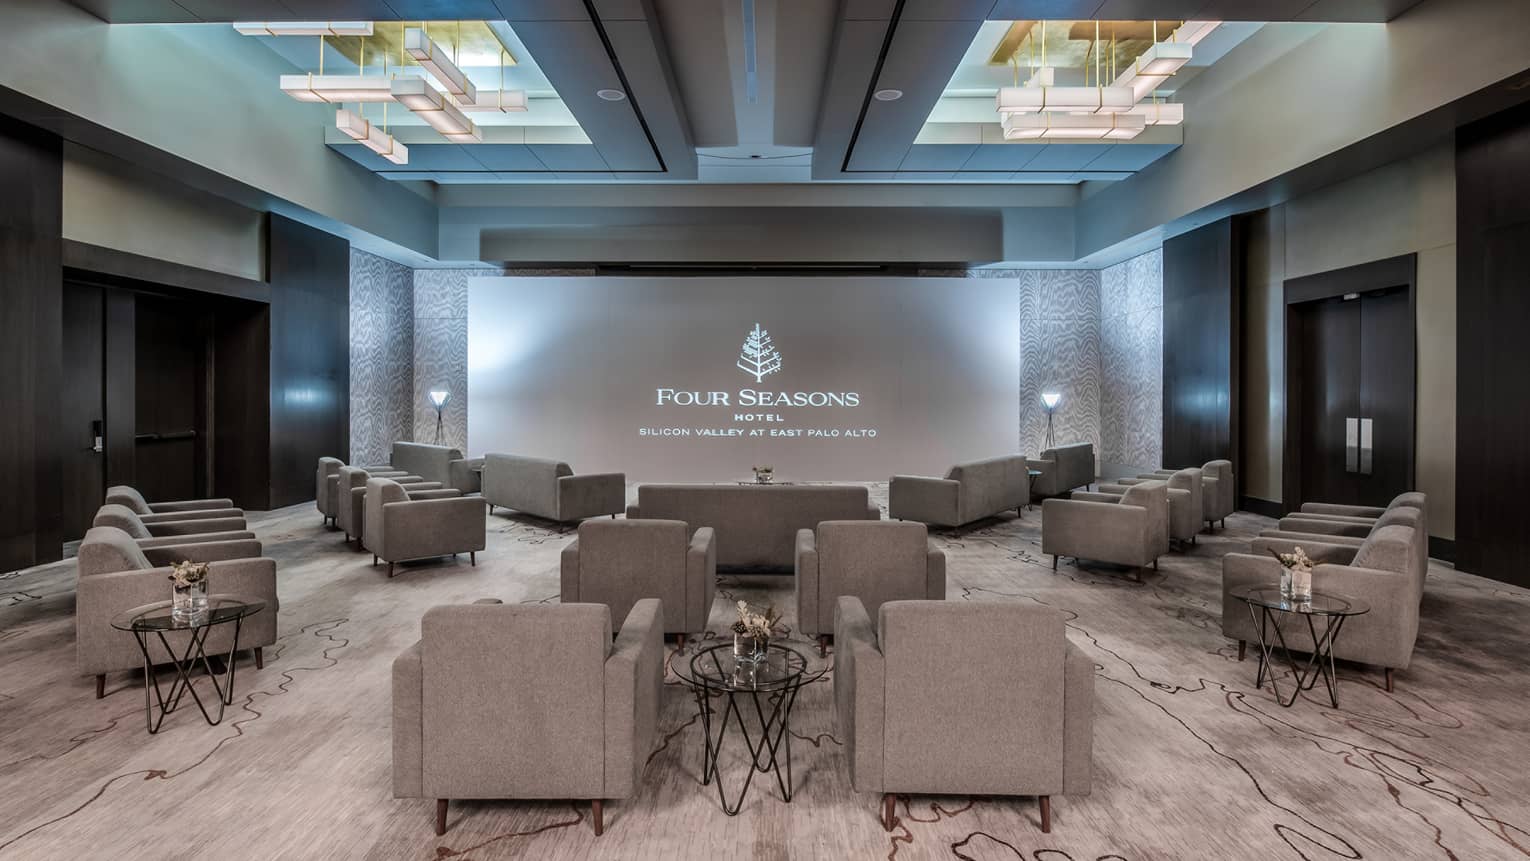 Gray plush chairs are angled towards a large projector in an indoor carpeted event space